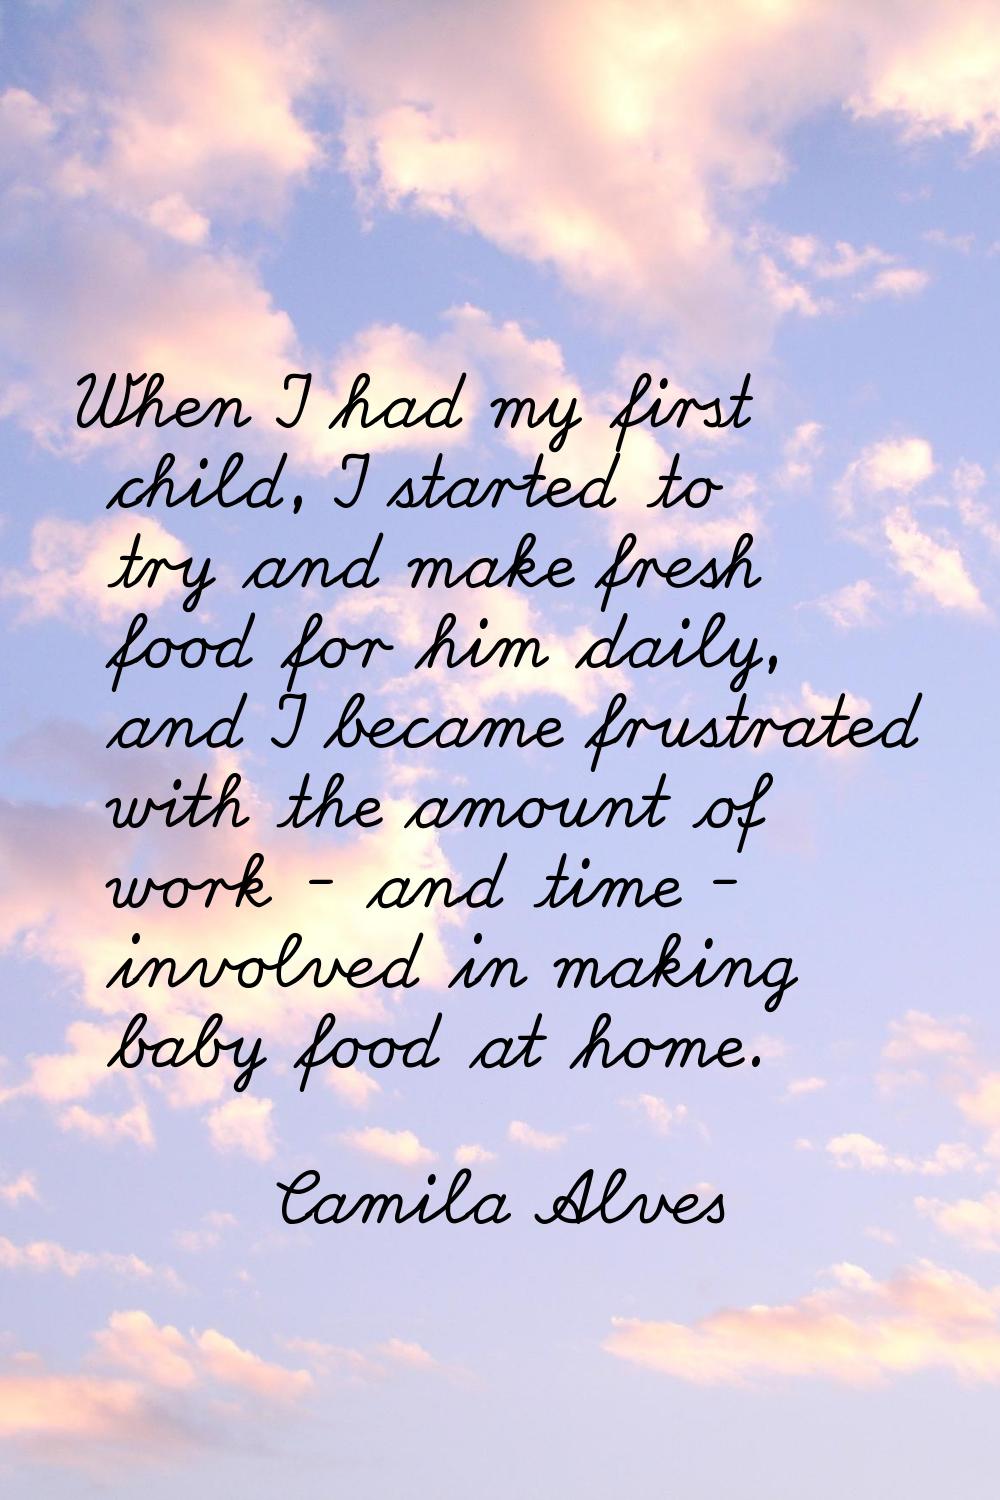 When I had my first child, I started to try and make fresh food for him daily, and I became frustra